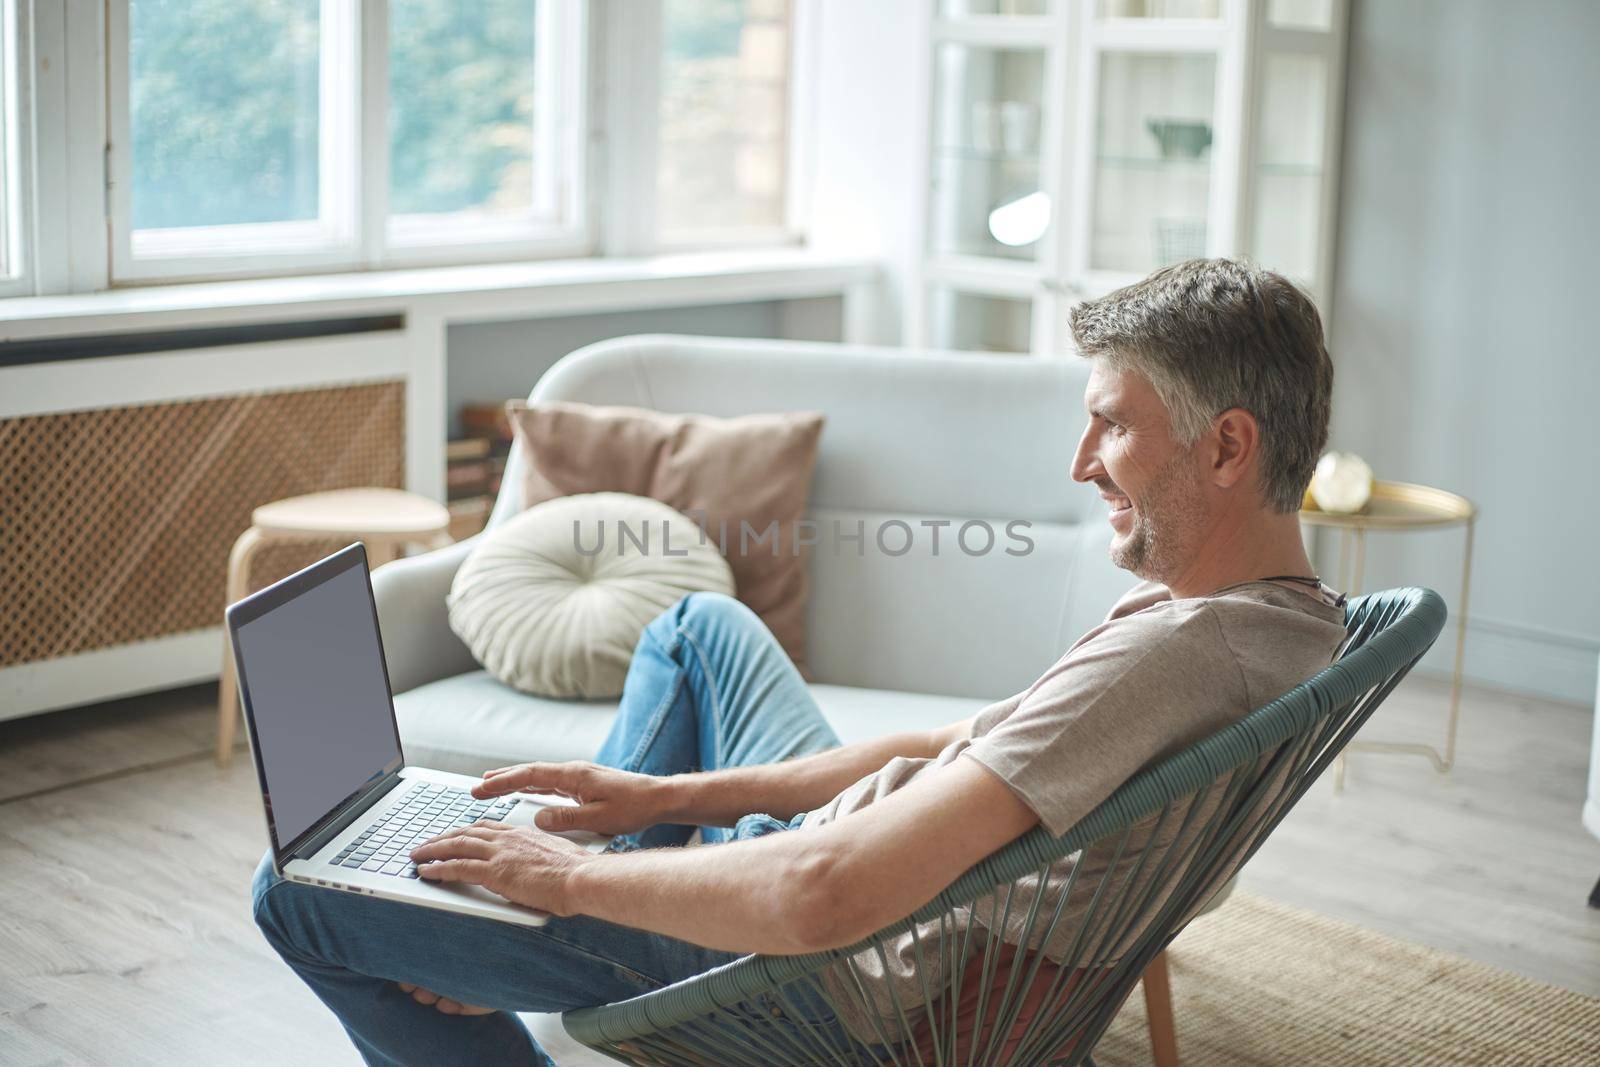 cropped image of a man using a laptop while sitting in a chair. side view.